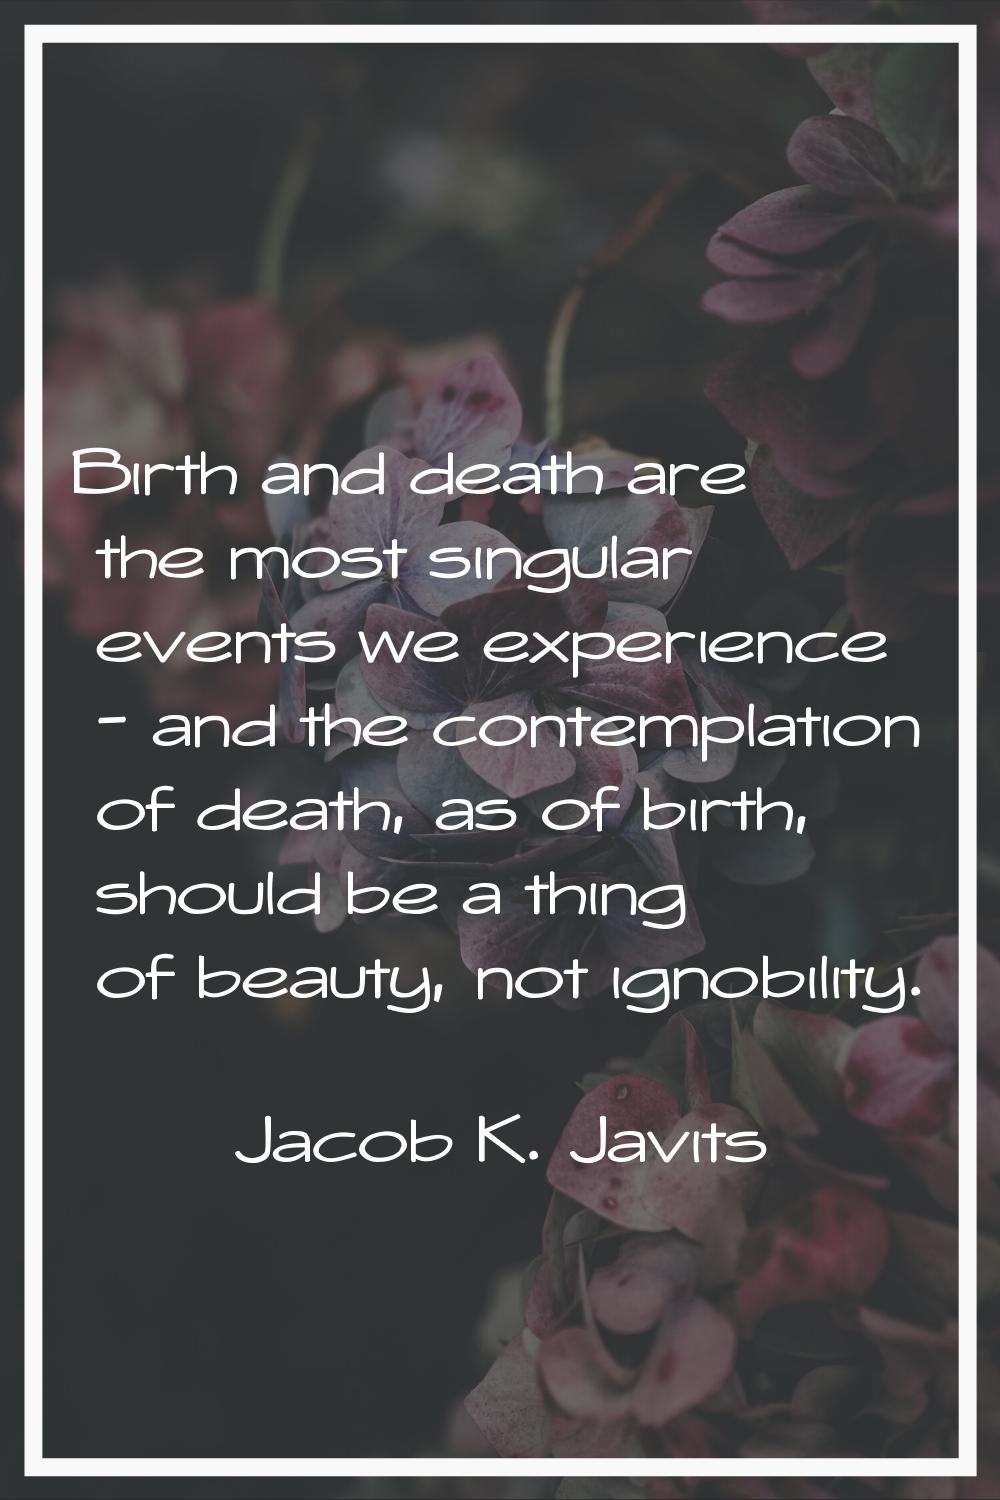 Birth and death are the most singular events we experience - and the contemplation of death, as of 